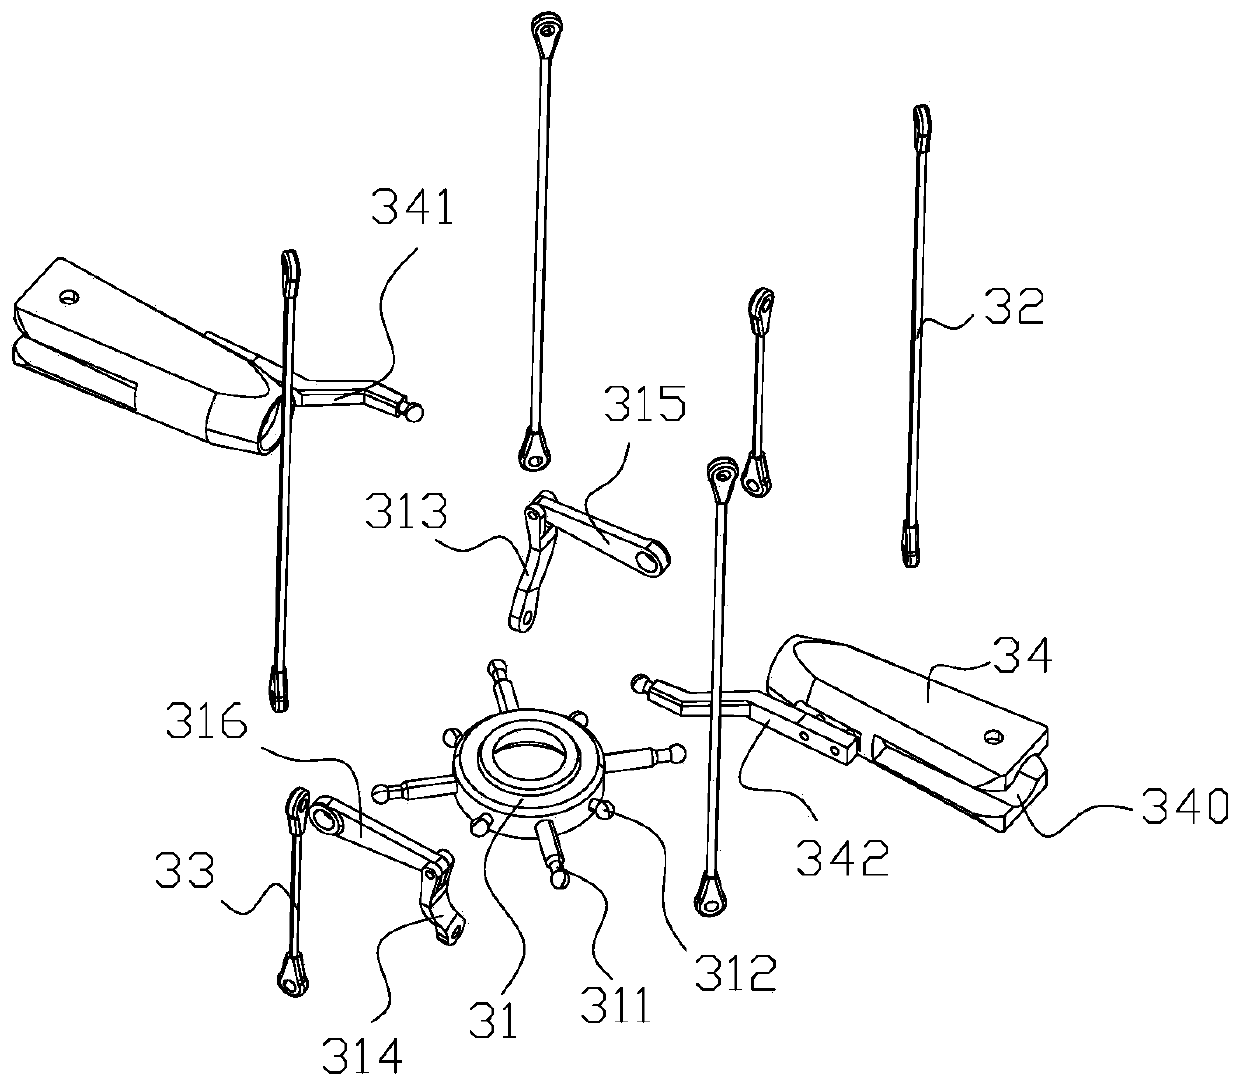 Propeller driving mechanism for unmanned aerial vehicle toy